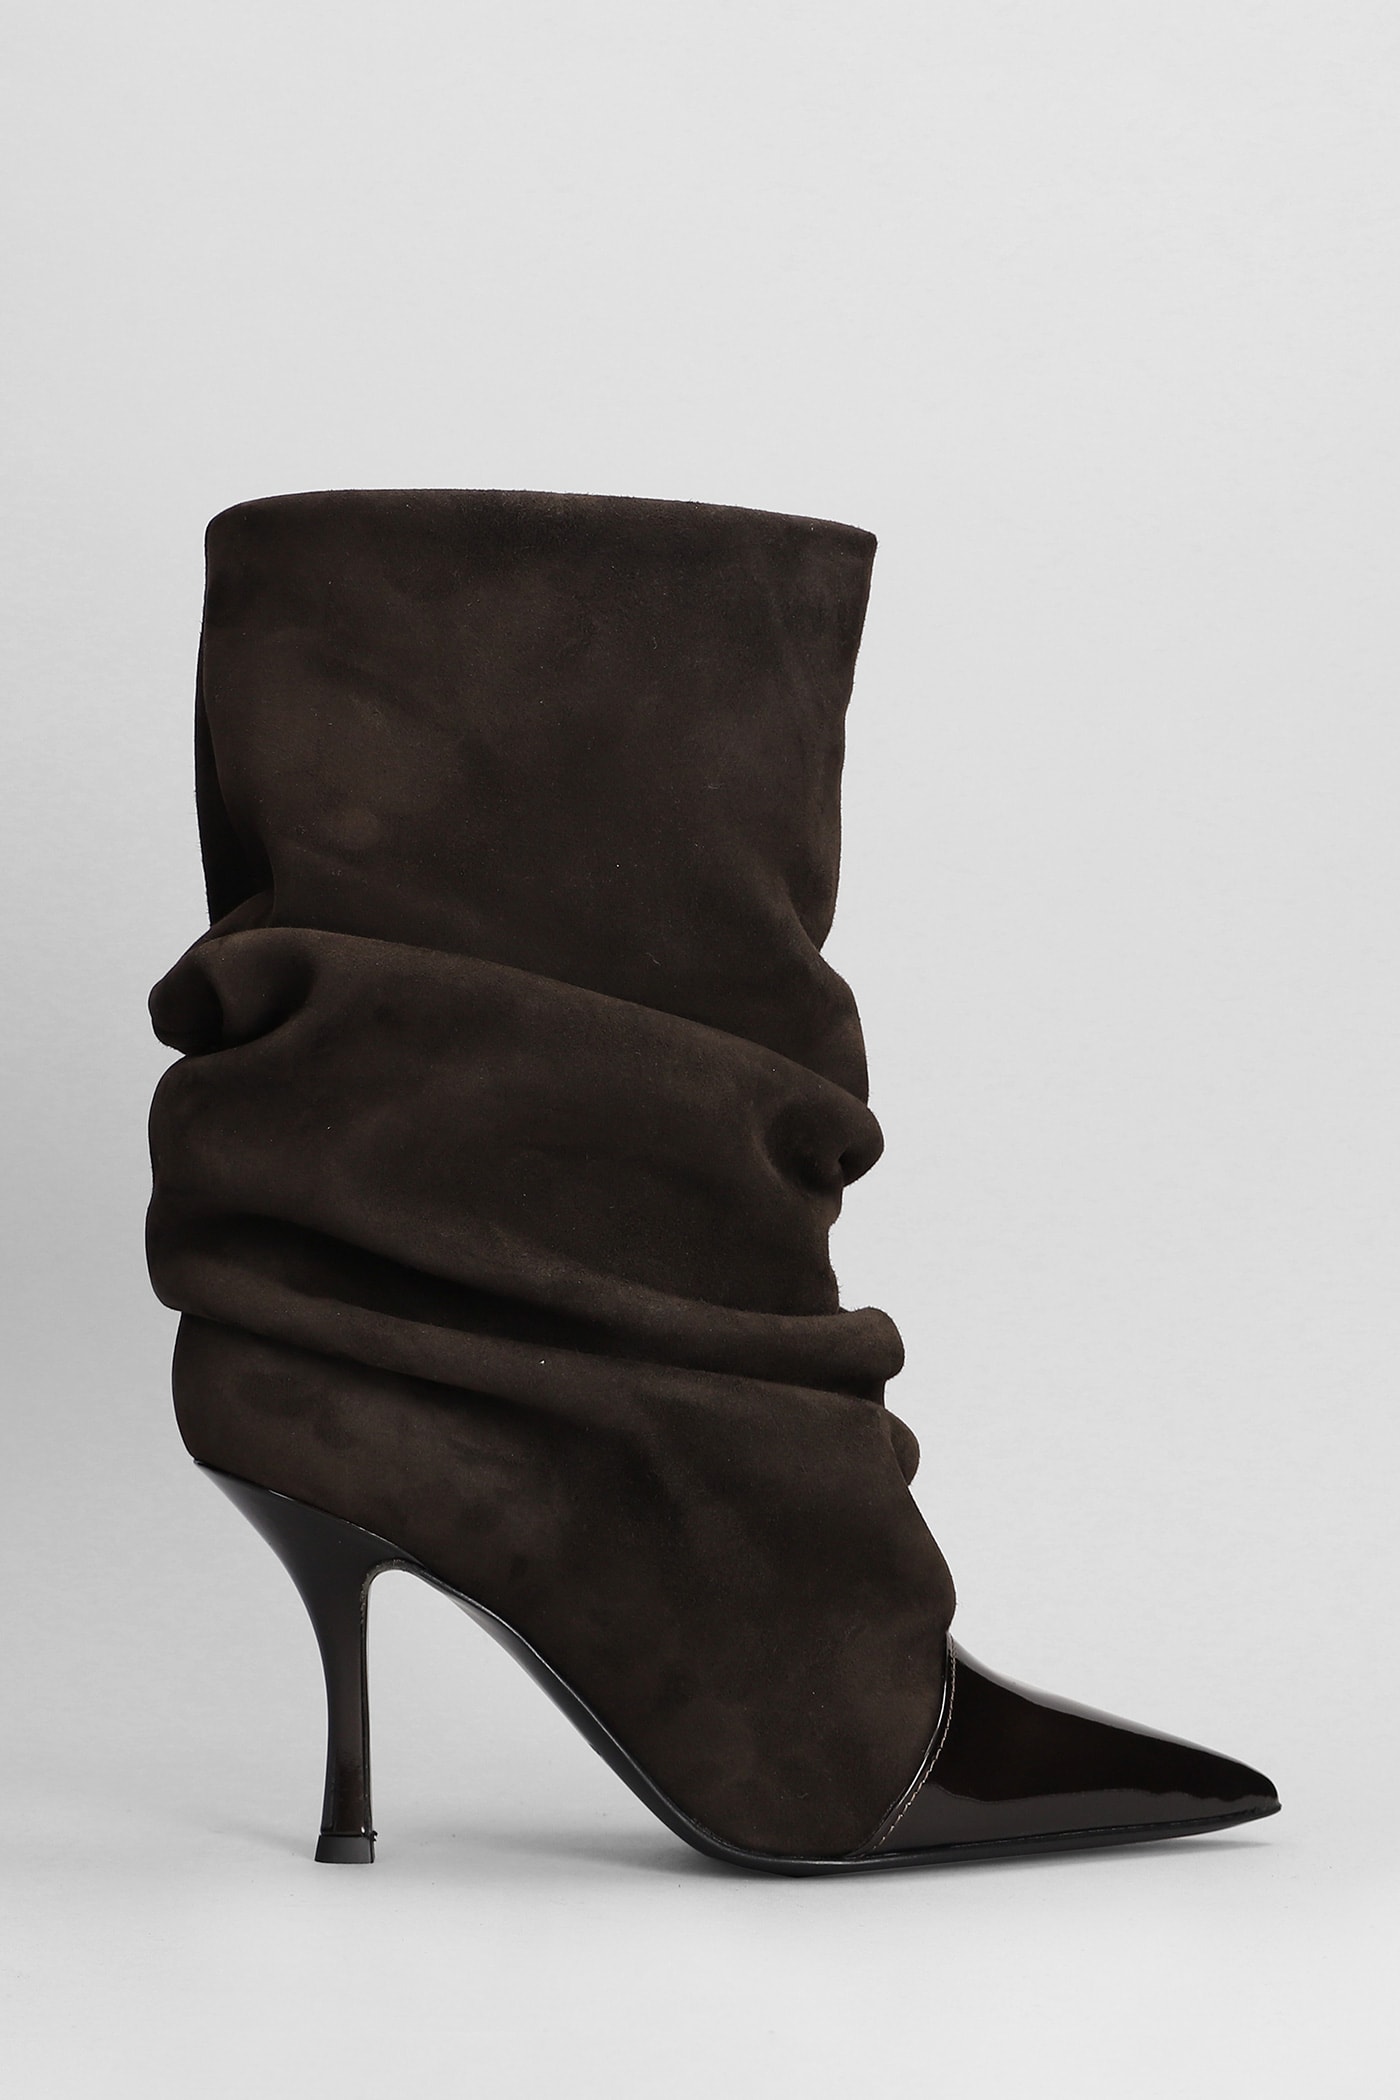 High Heels Ankle Boots In Brown Suede